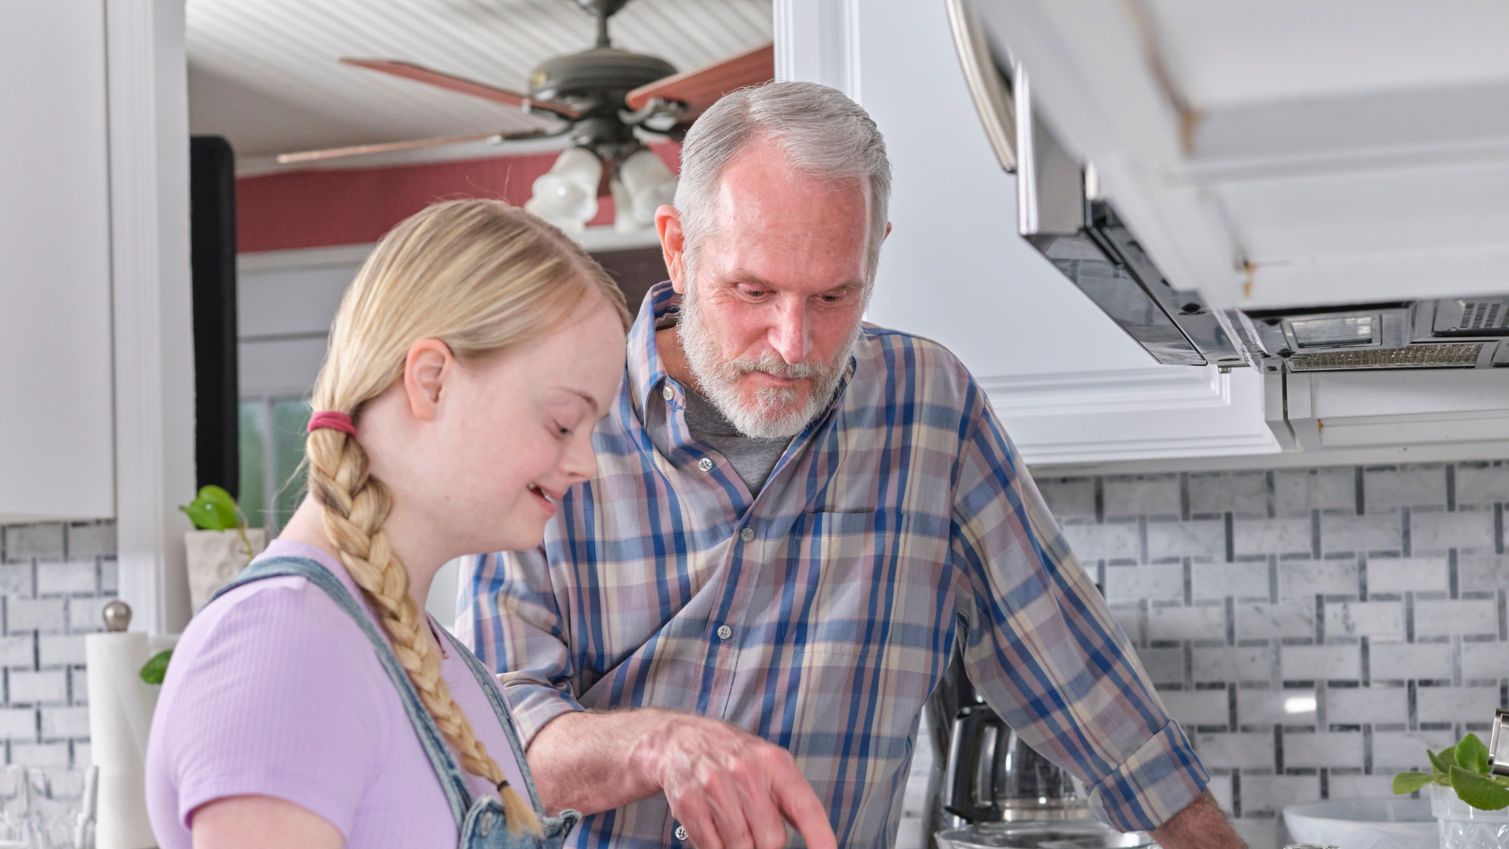 Teen daughter cooks with caregiver